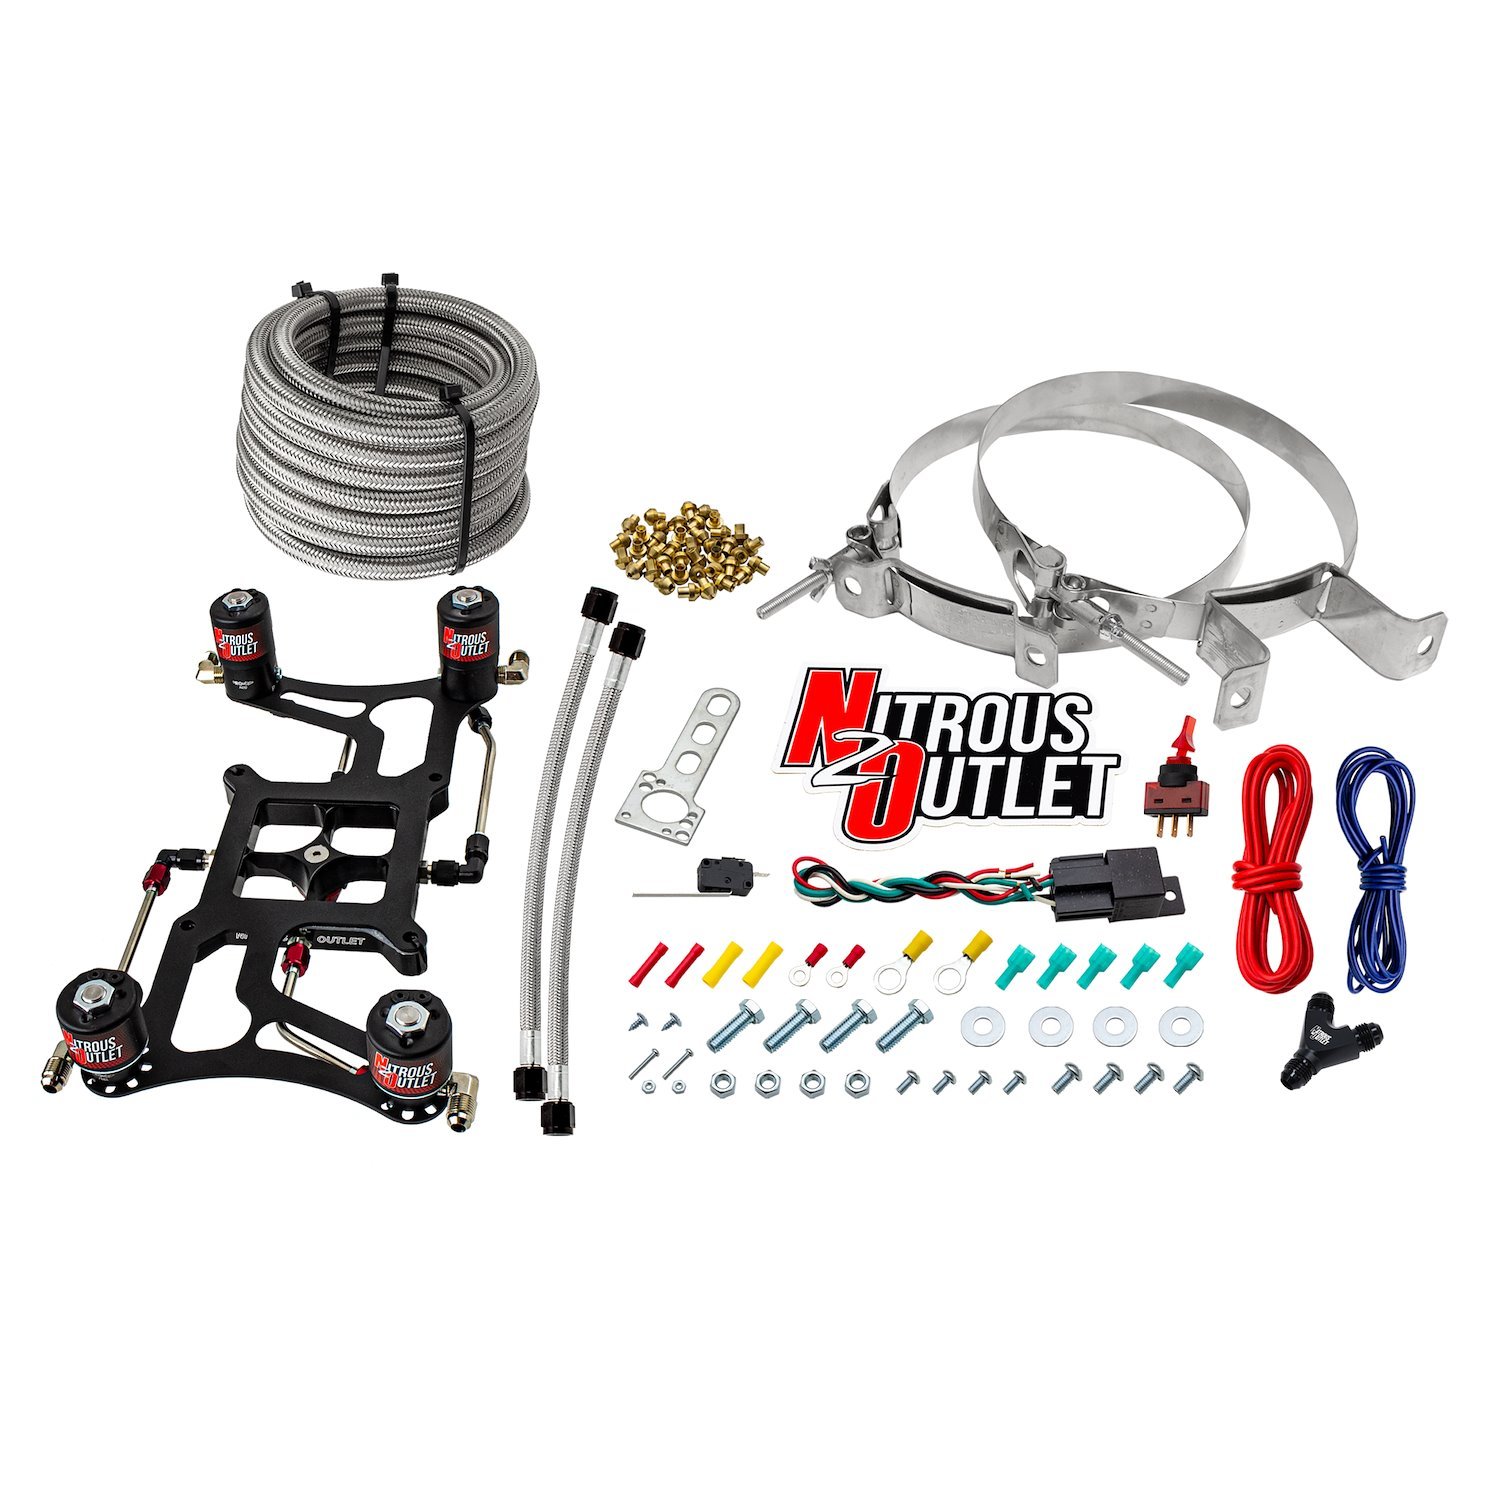 00-10628-00 4150 Hornet 2 Race Dual-Stage System, Hard-Line